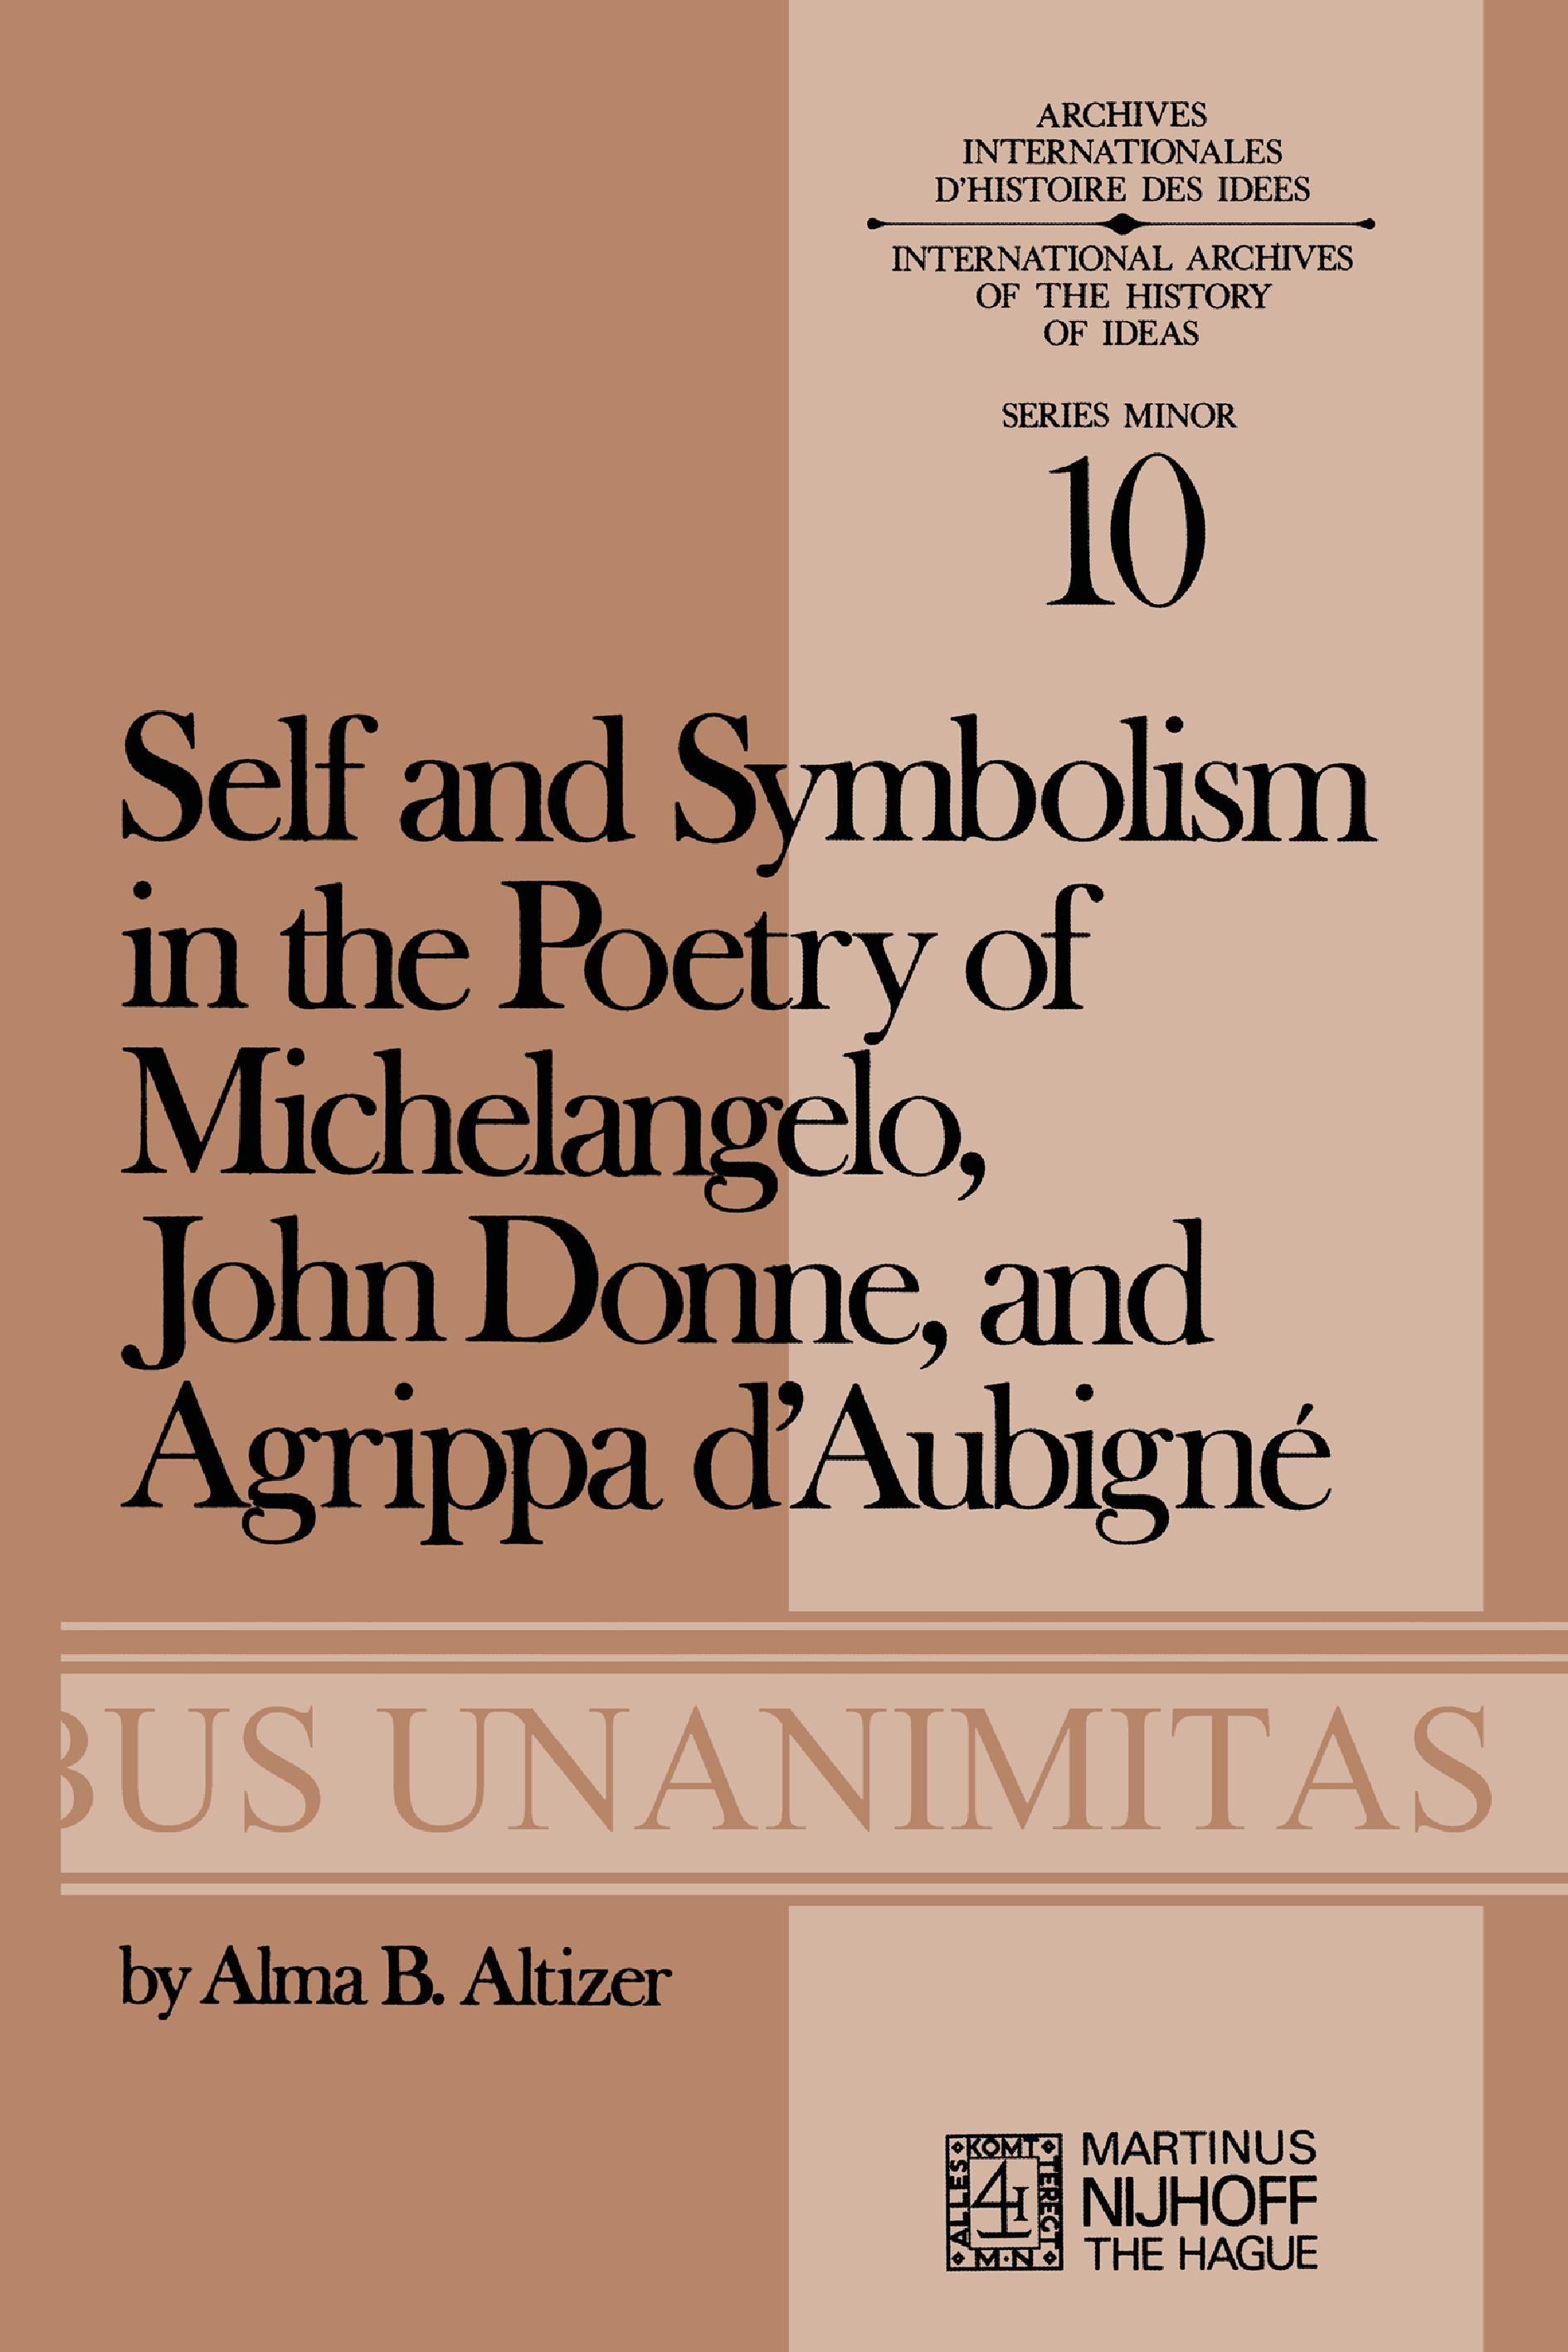 Self and Symbolism in the Poetry of Michelangelo, John Donne and Agrippa D'Aubigne - A.B. Altizer